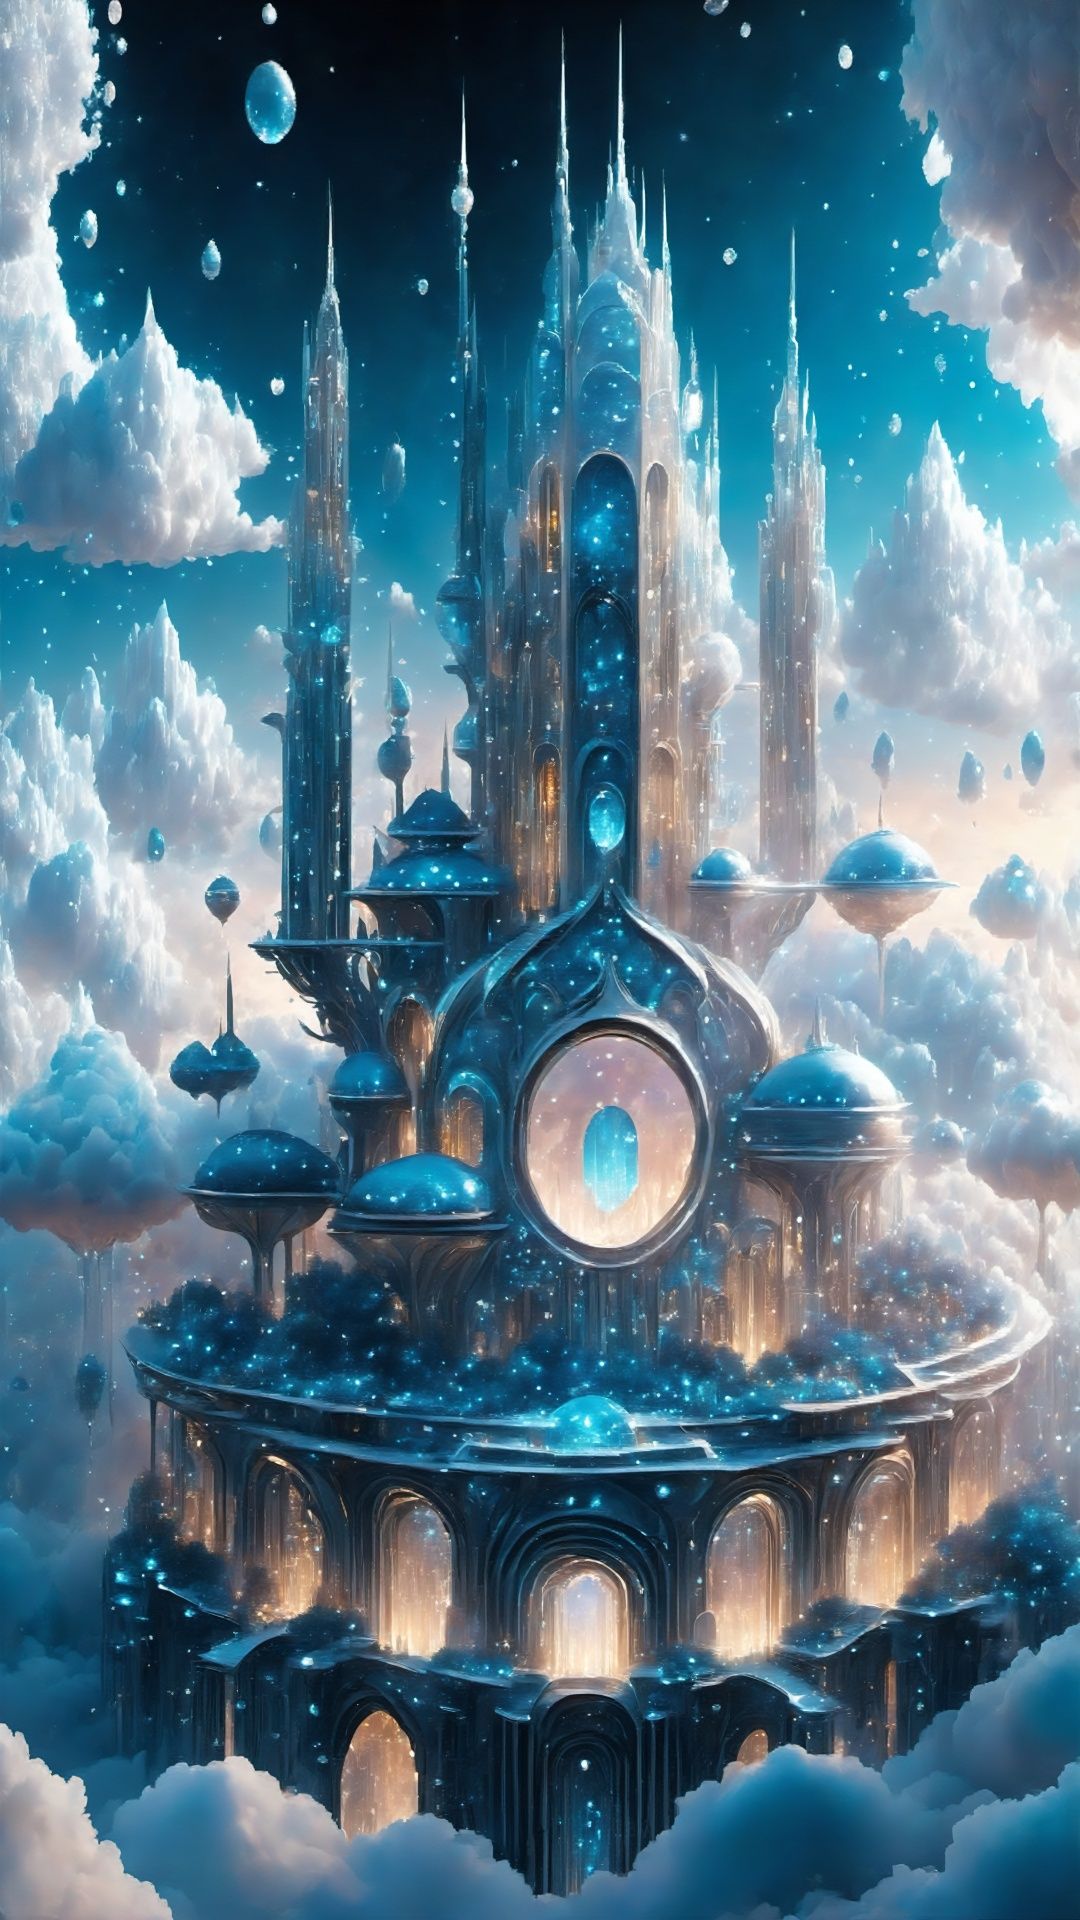 (Fantasy Architectural Style) (Fantasy Elements) (Advanced Color Art) (Architectural Art) (Intricate Details) High above the city, there is a city in the clouds. Palaces and gardens are built on these clouds, and residents can walk among the fluffy clouds. , enjoy the panoramic view of the city. The buildings here are made of clouds and crystals, just like a fairyland